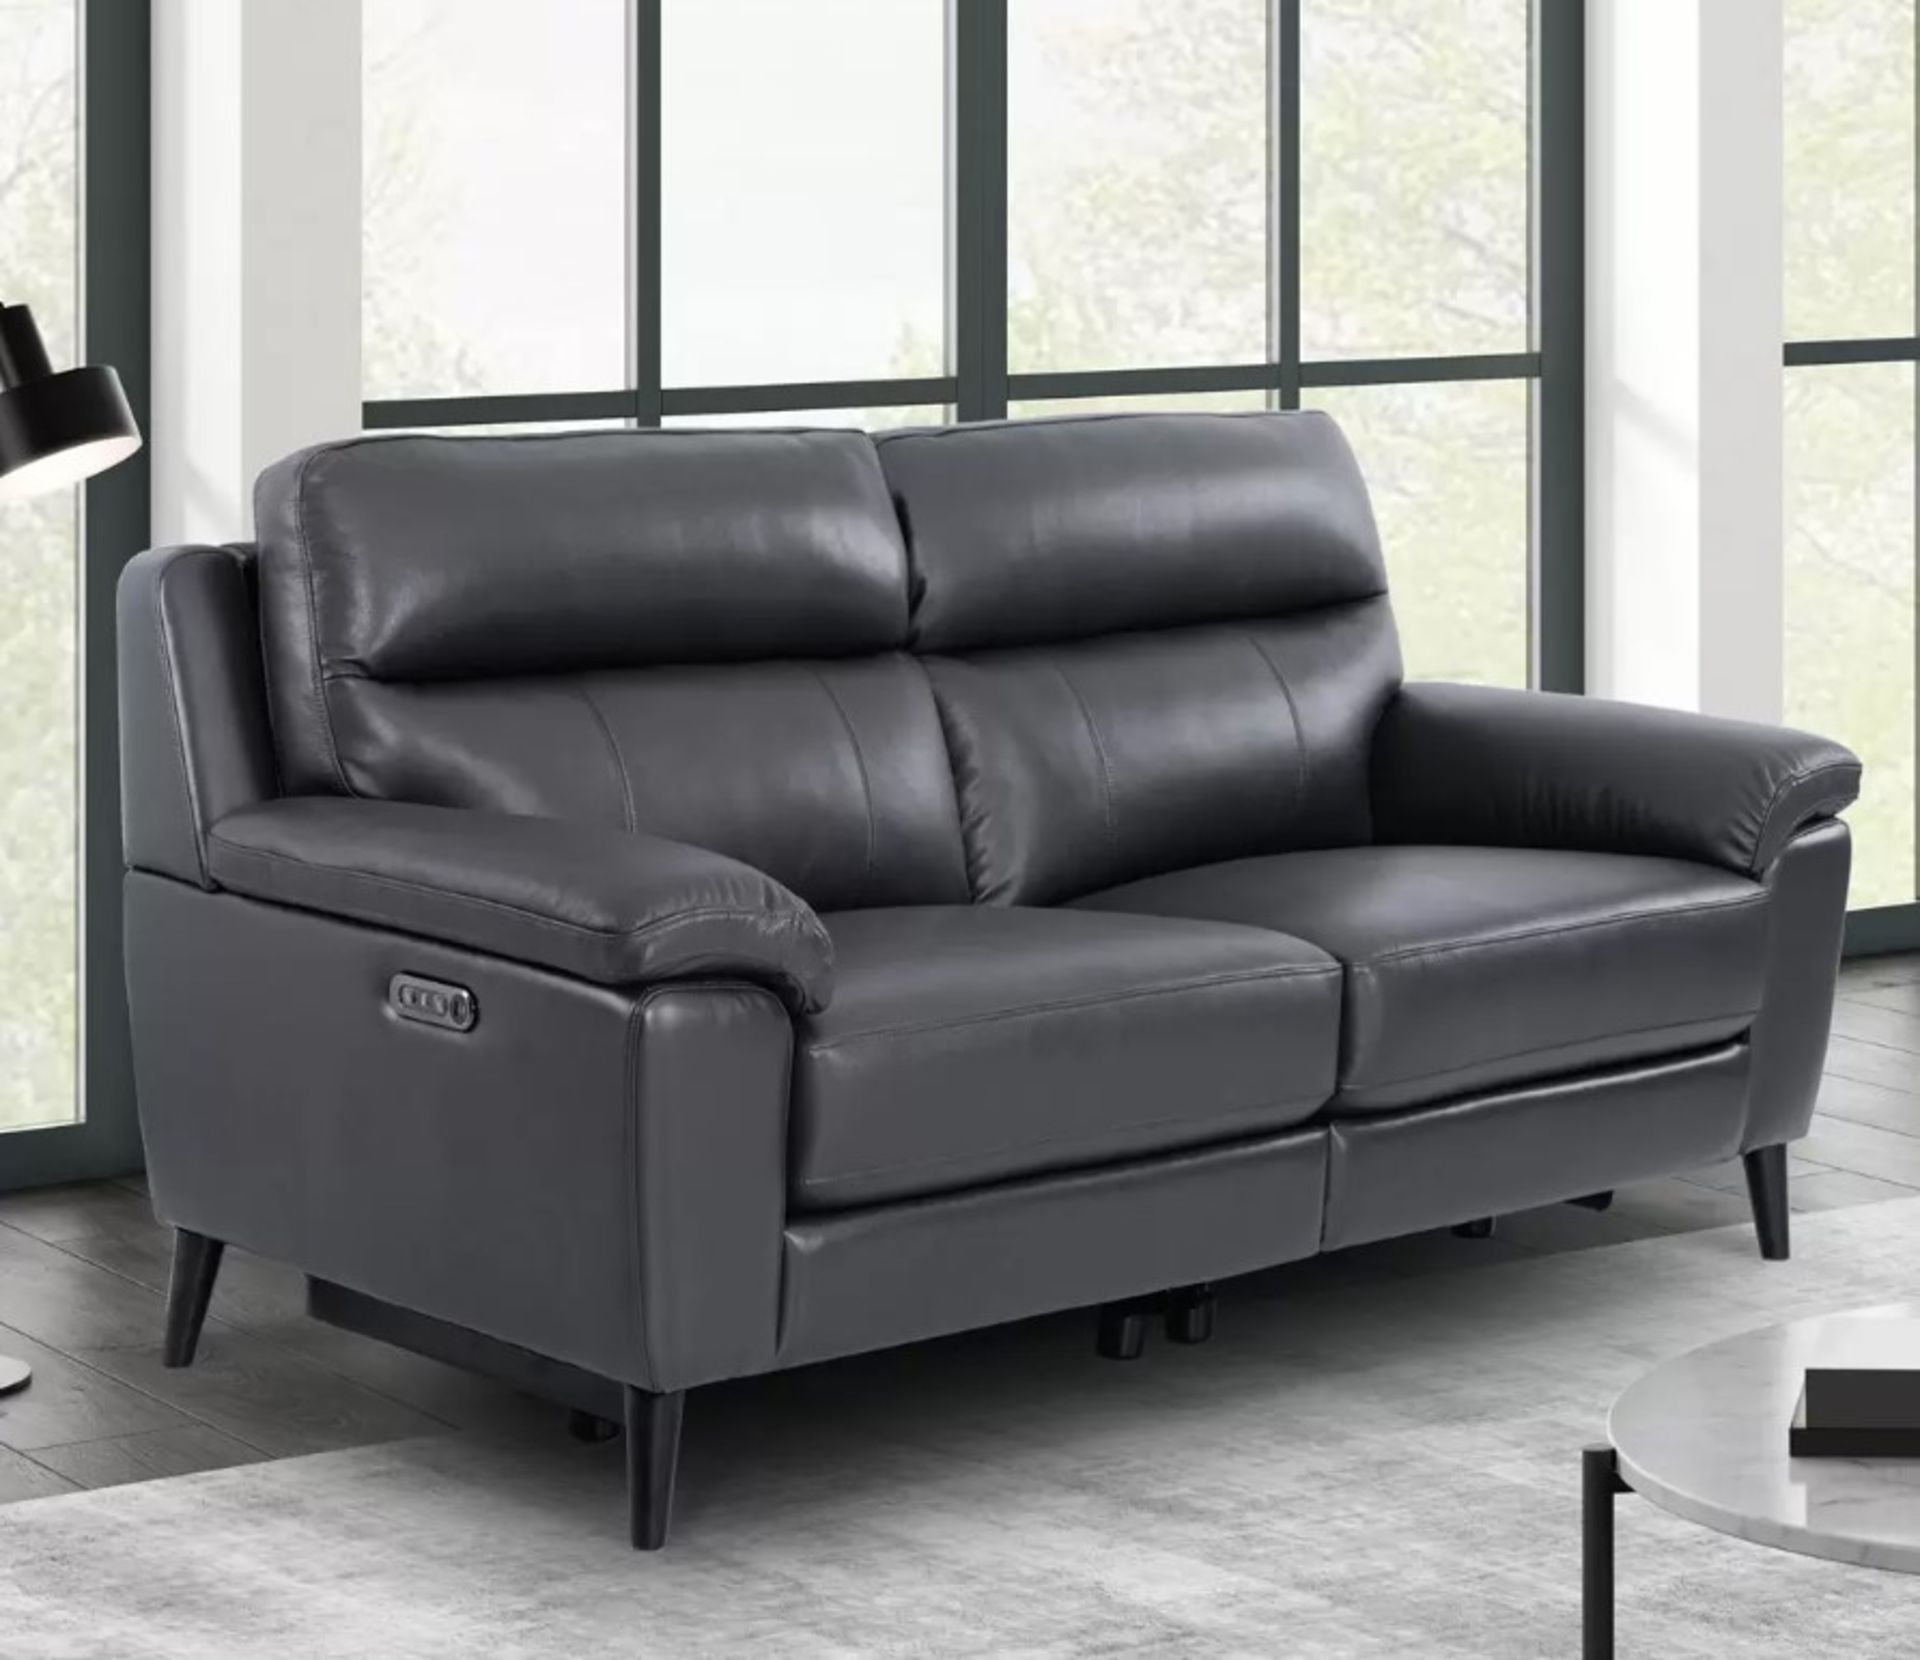 1 GRACE DARK GREY LEATHER POWER RECLINING LARGE 2 SEATER SOFA RRP Â£1199 (ONLY 1 RECLINER WORKING,